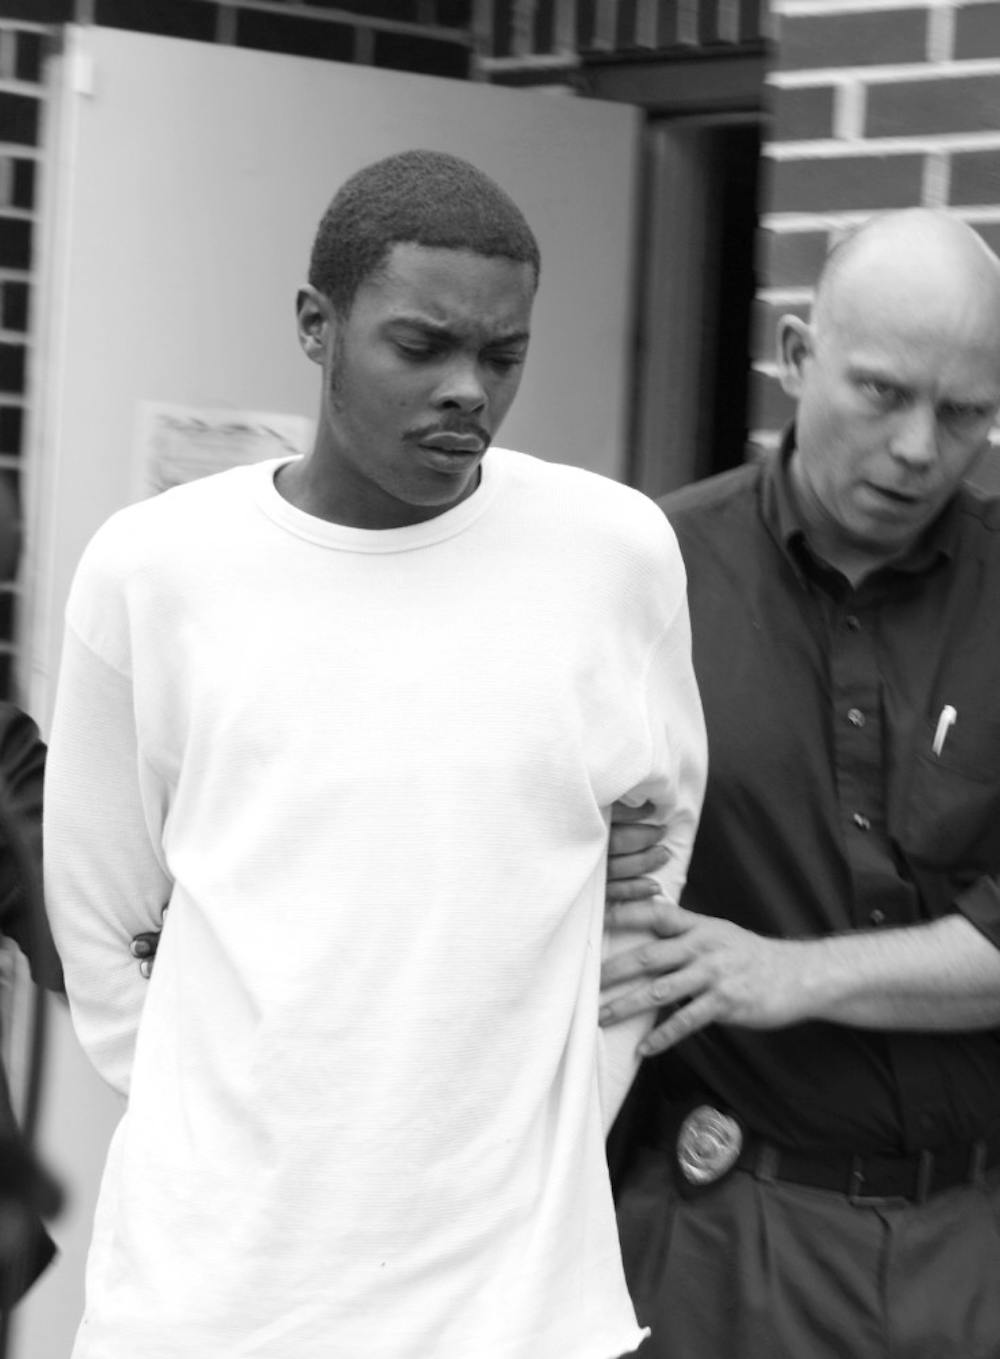 <p>Marcus S. Brantley, 21, who was arrested and charged with home invasion robbery, walks to a police car Thursday morning.</p>